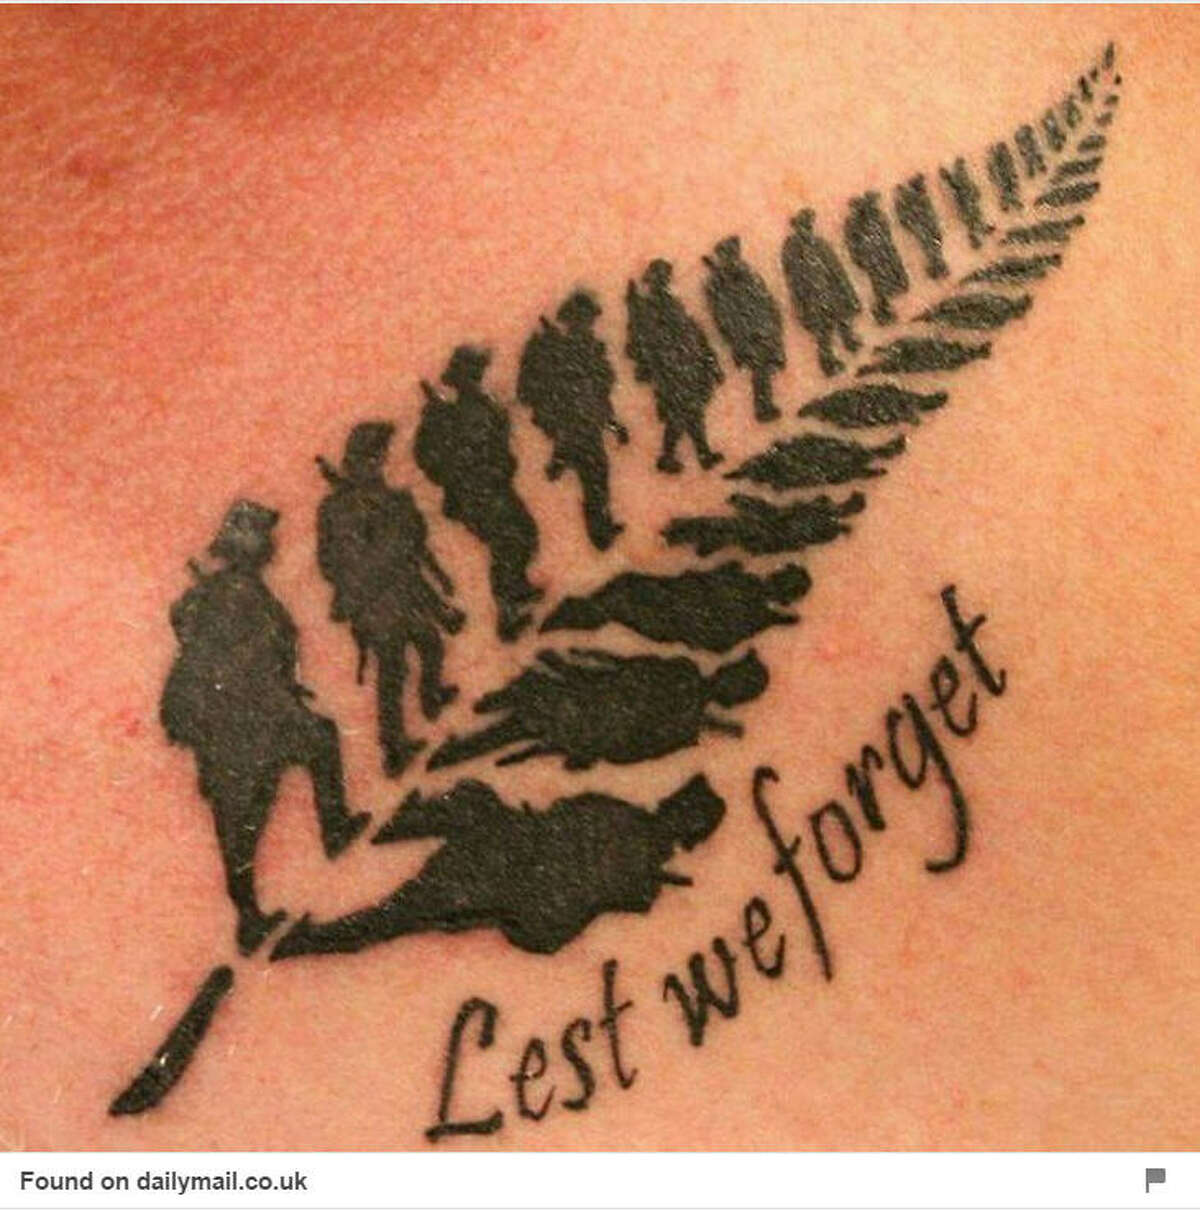 Tattoos tell a story. See some of the military themed tattoos seen on Pinterest. Like this one here.